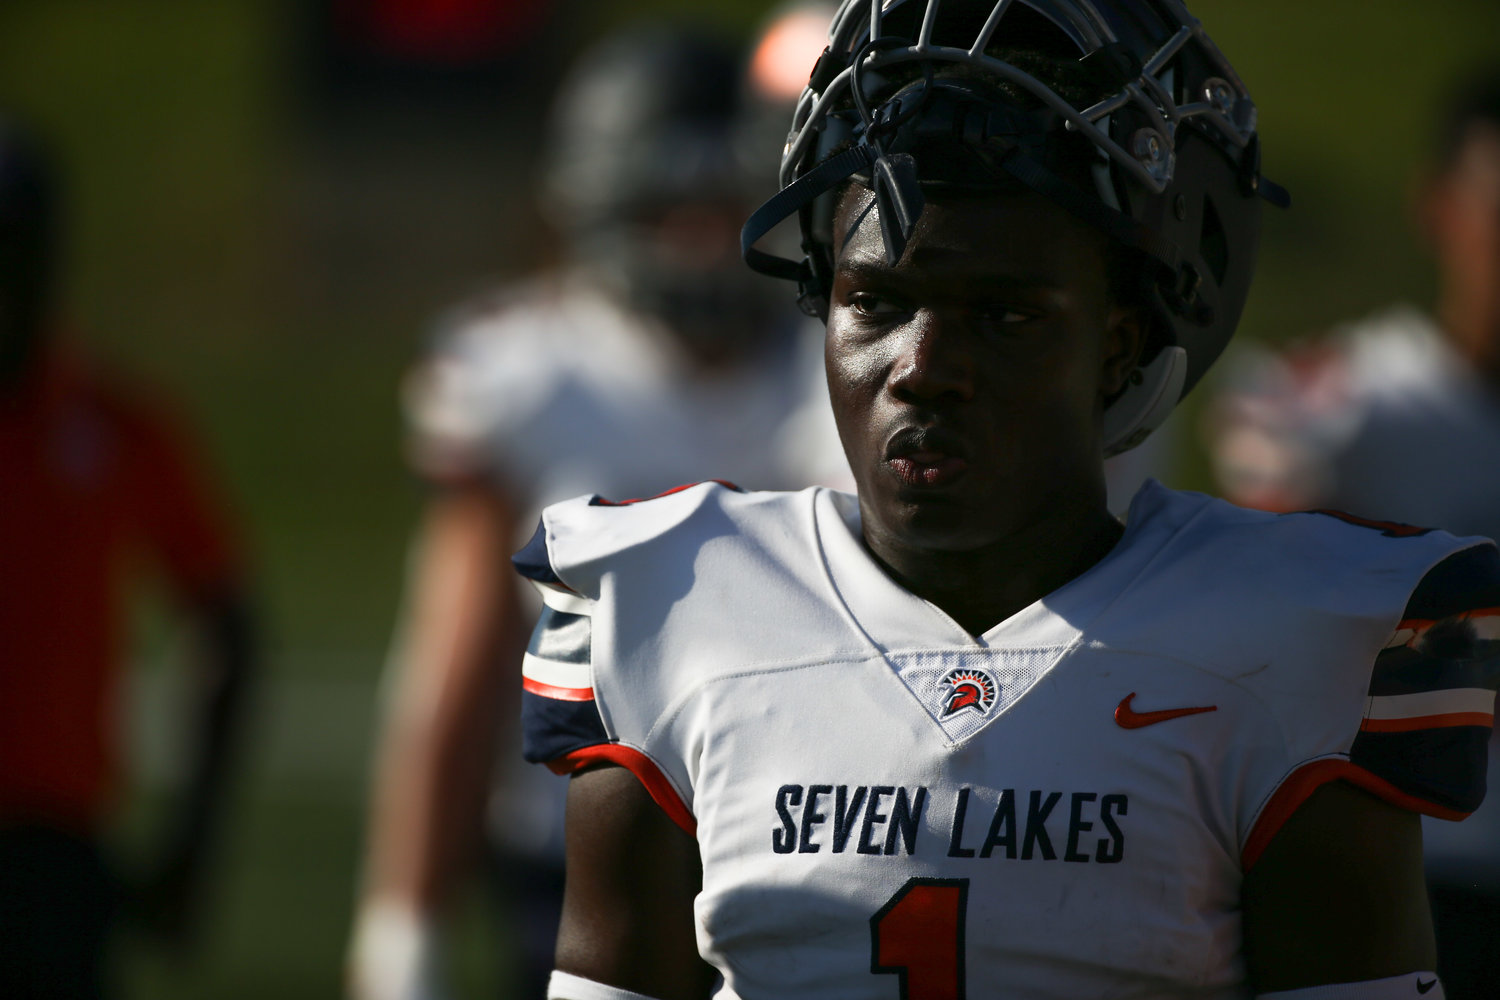 Seven Lakes Spartans defensive back Testimony Ajayi (1) walks on the sideline before the start of the game between the Seven Lakes Spartans and Memorial Mustangs on August 25, 2022 in Houston, Texas. Photo Credit: John Glaser - Katy Times